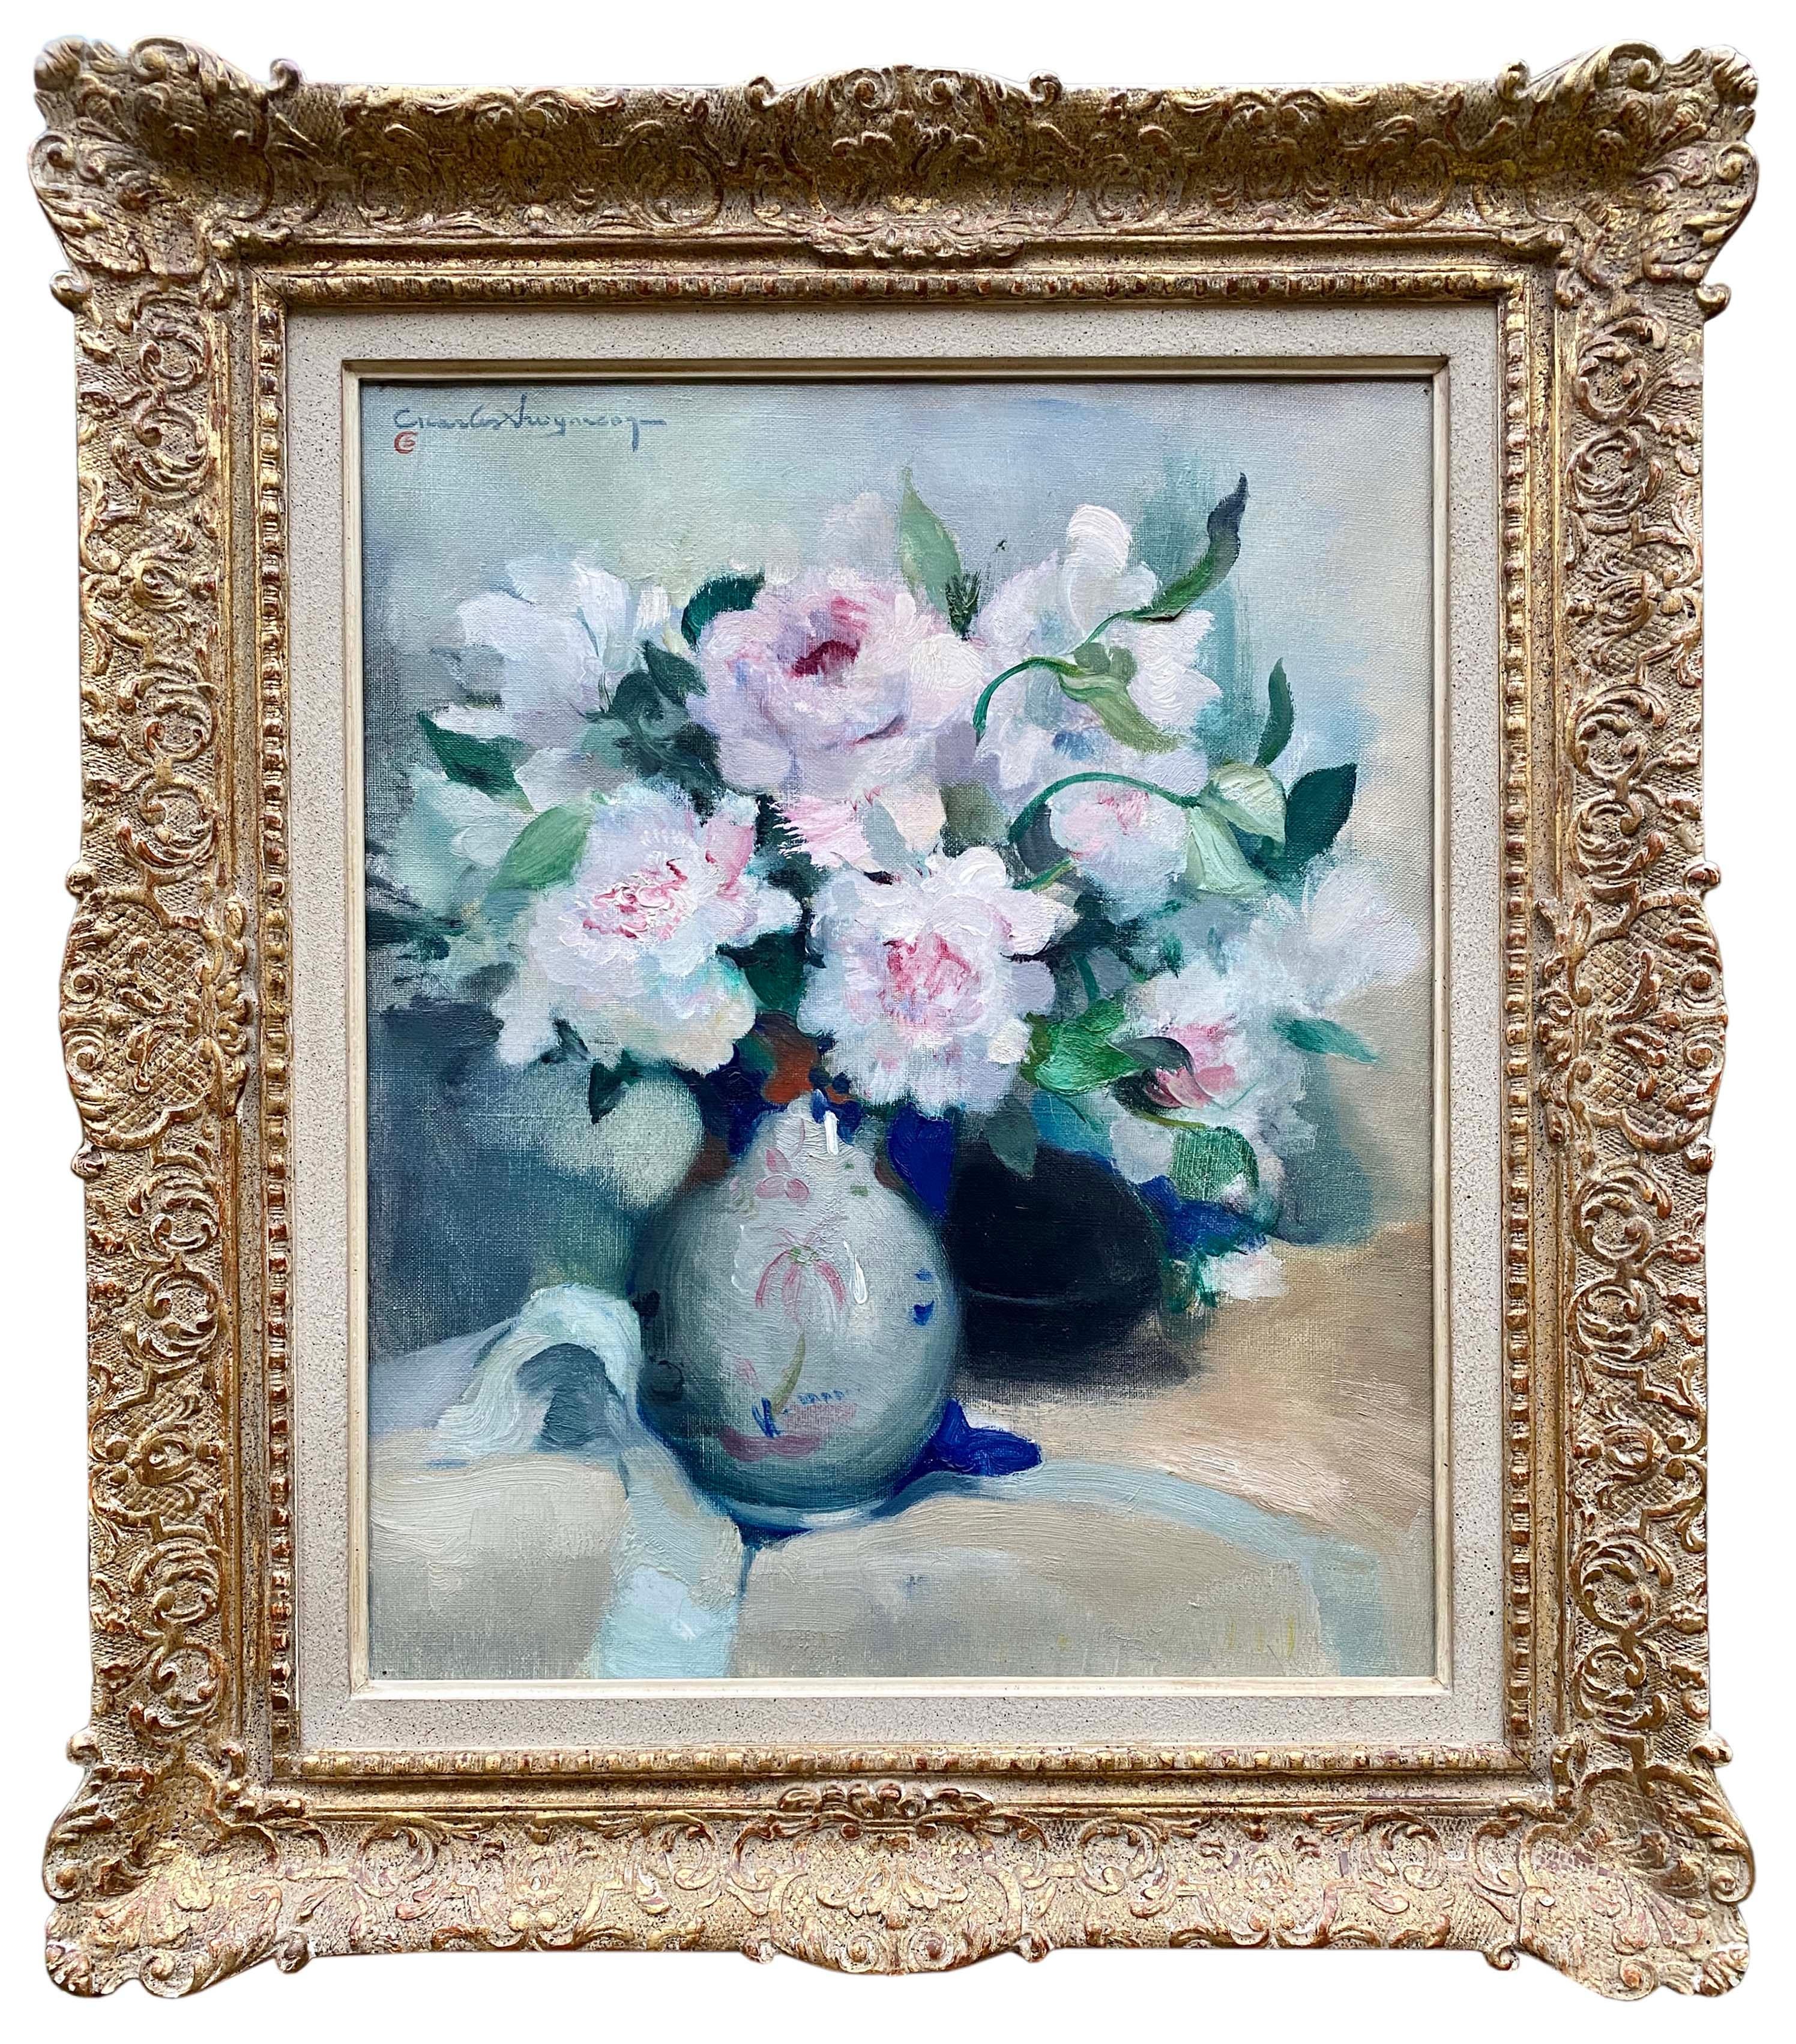 White and Pink Peonies in Vase, Charles Swyncop, Brussels 1895 – 1970, Signed